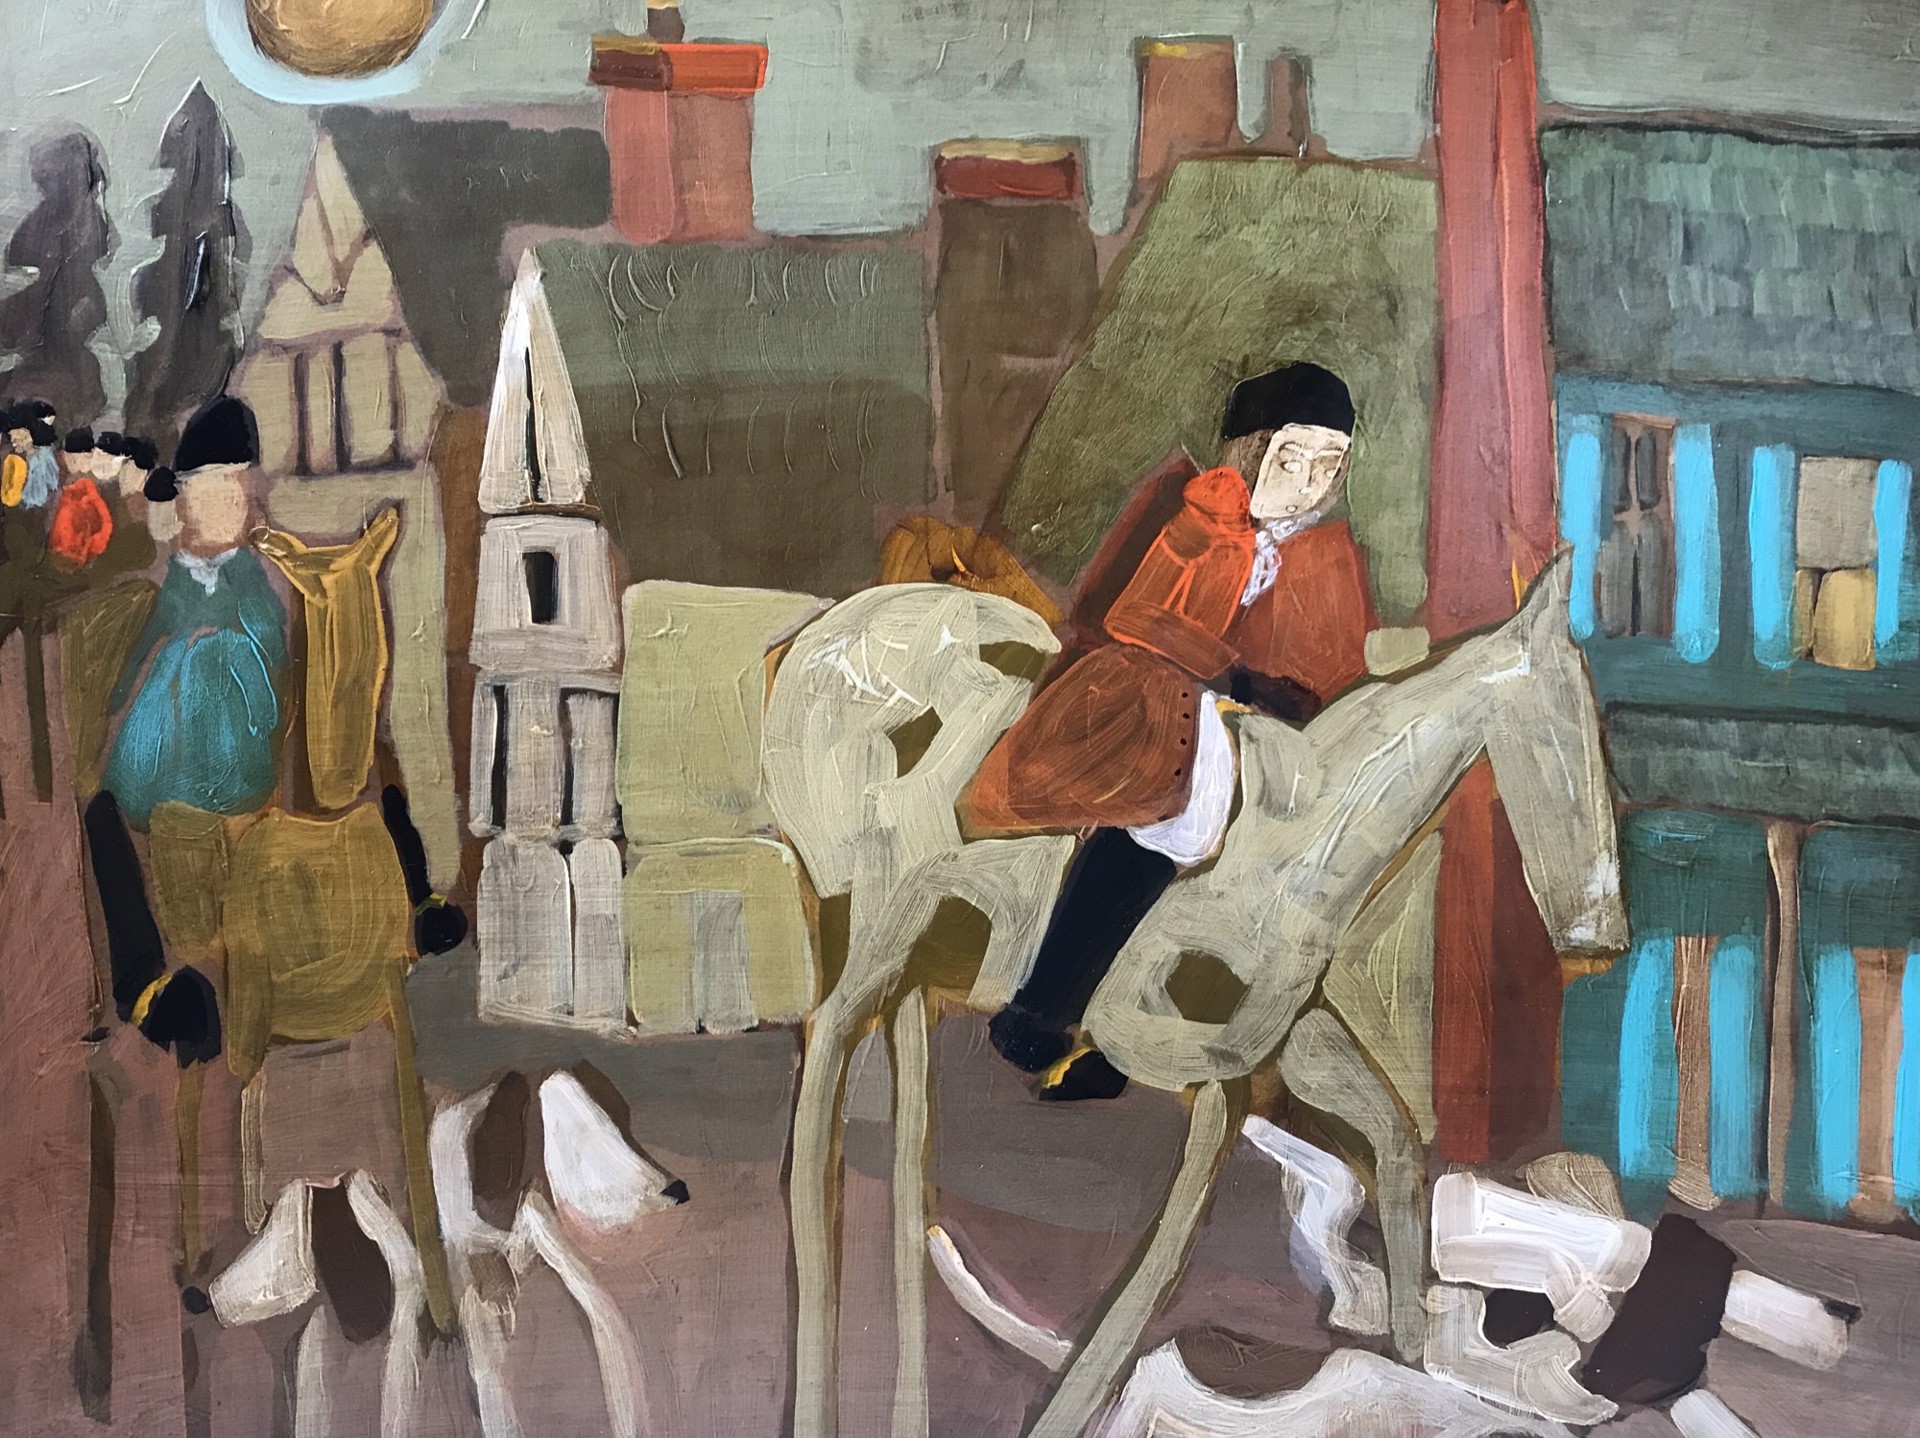 Master of Foxhounds Parades by Rachael Van Dyke